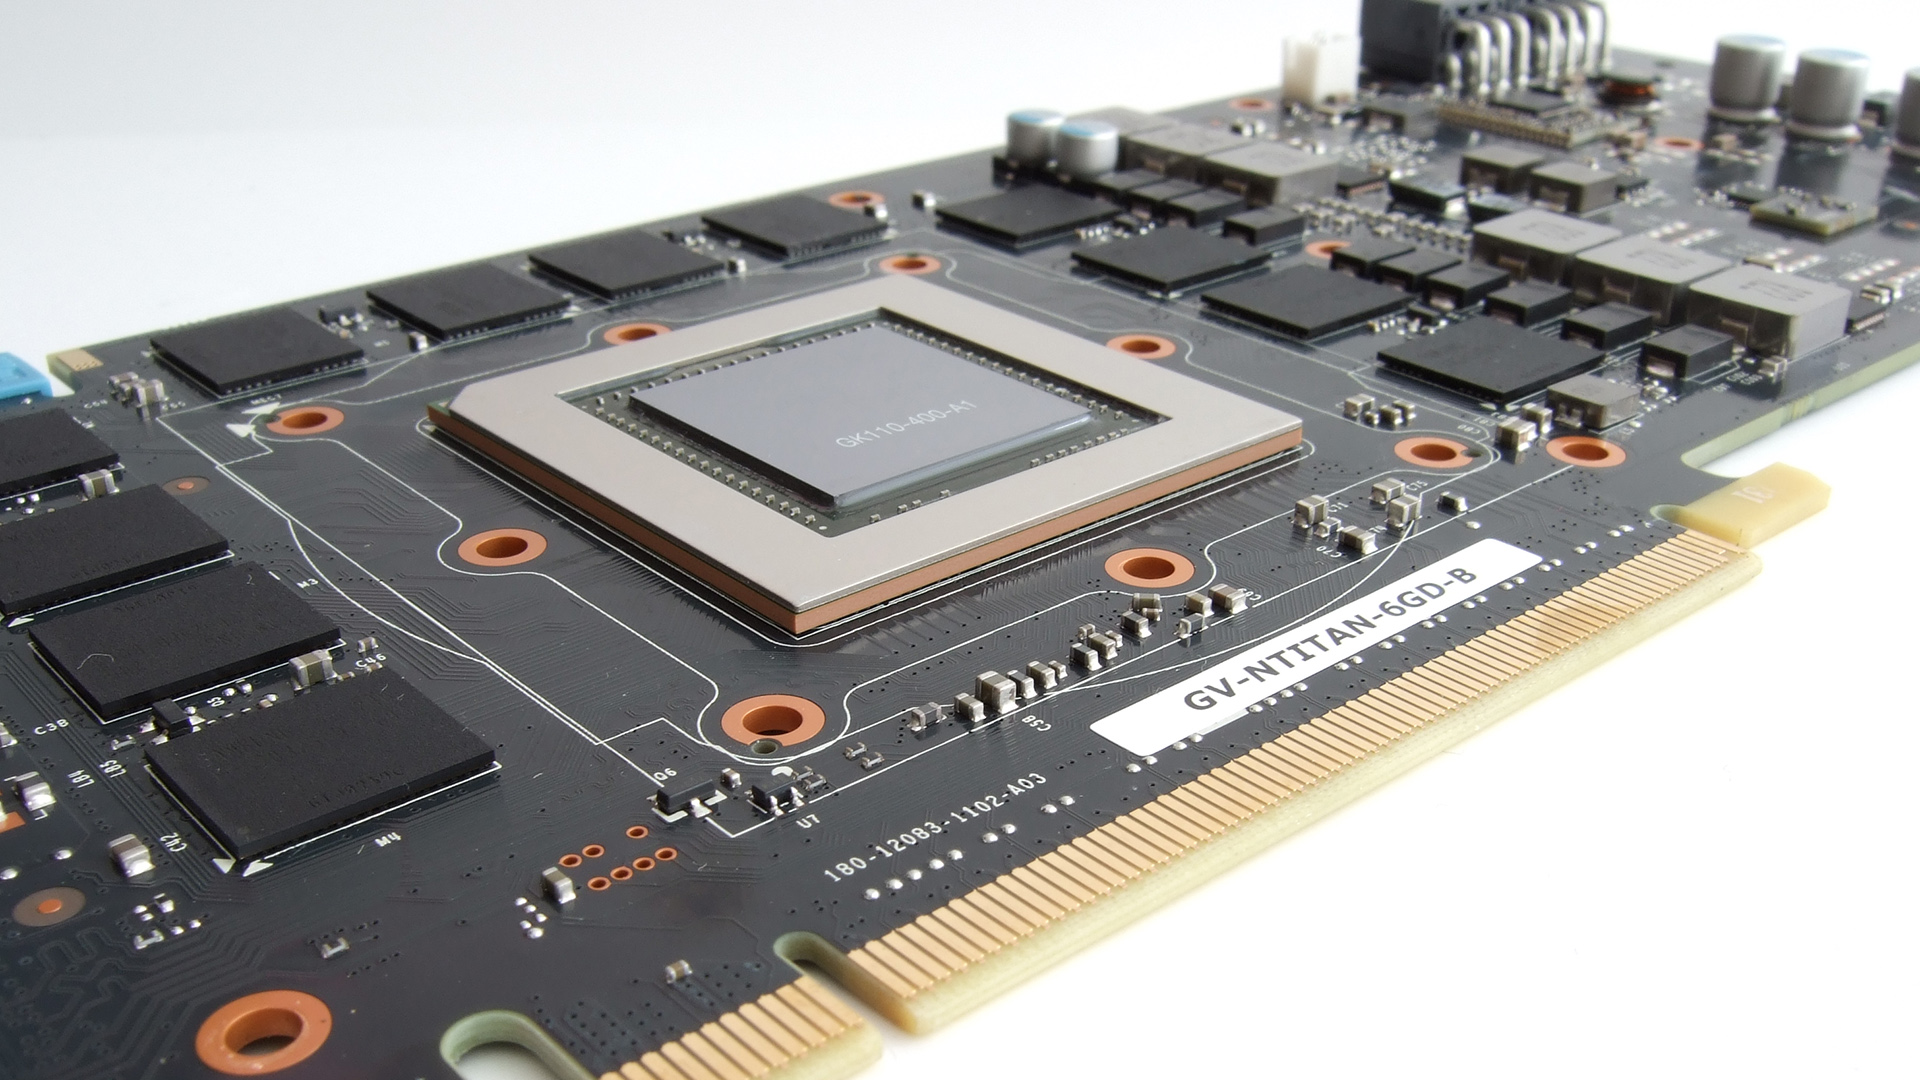 How GeForce changed graphics forever, the GPU: what to know